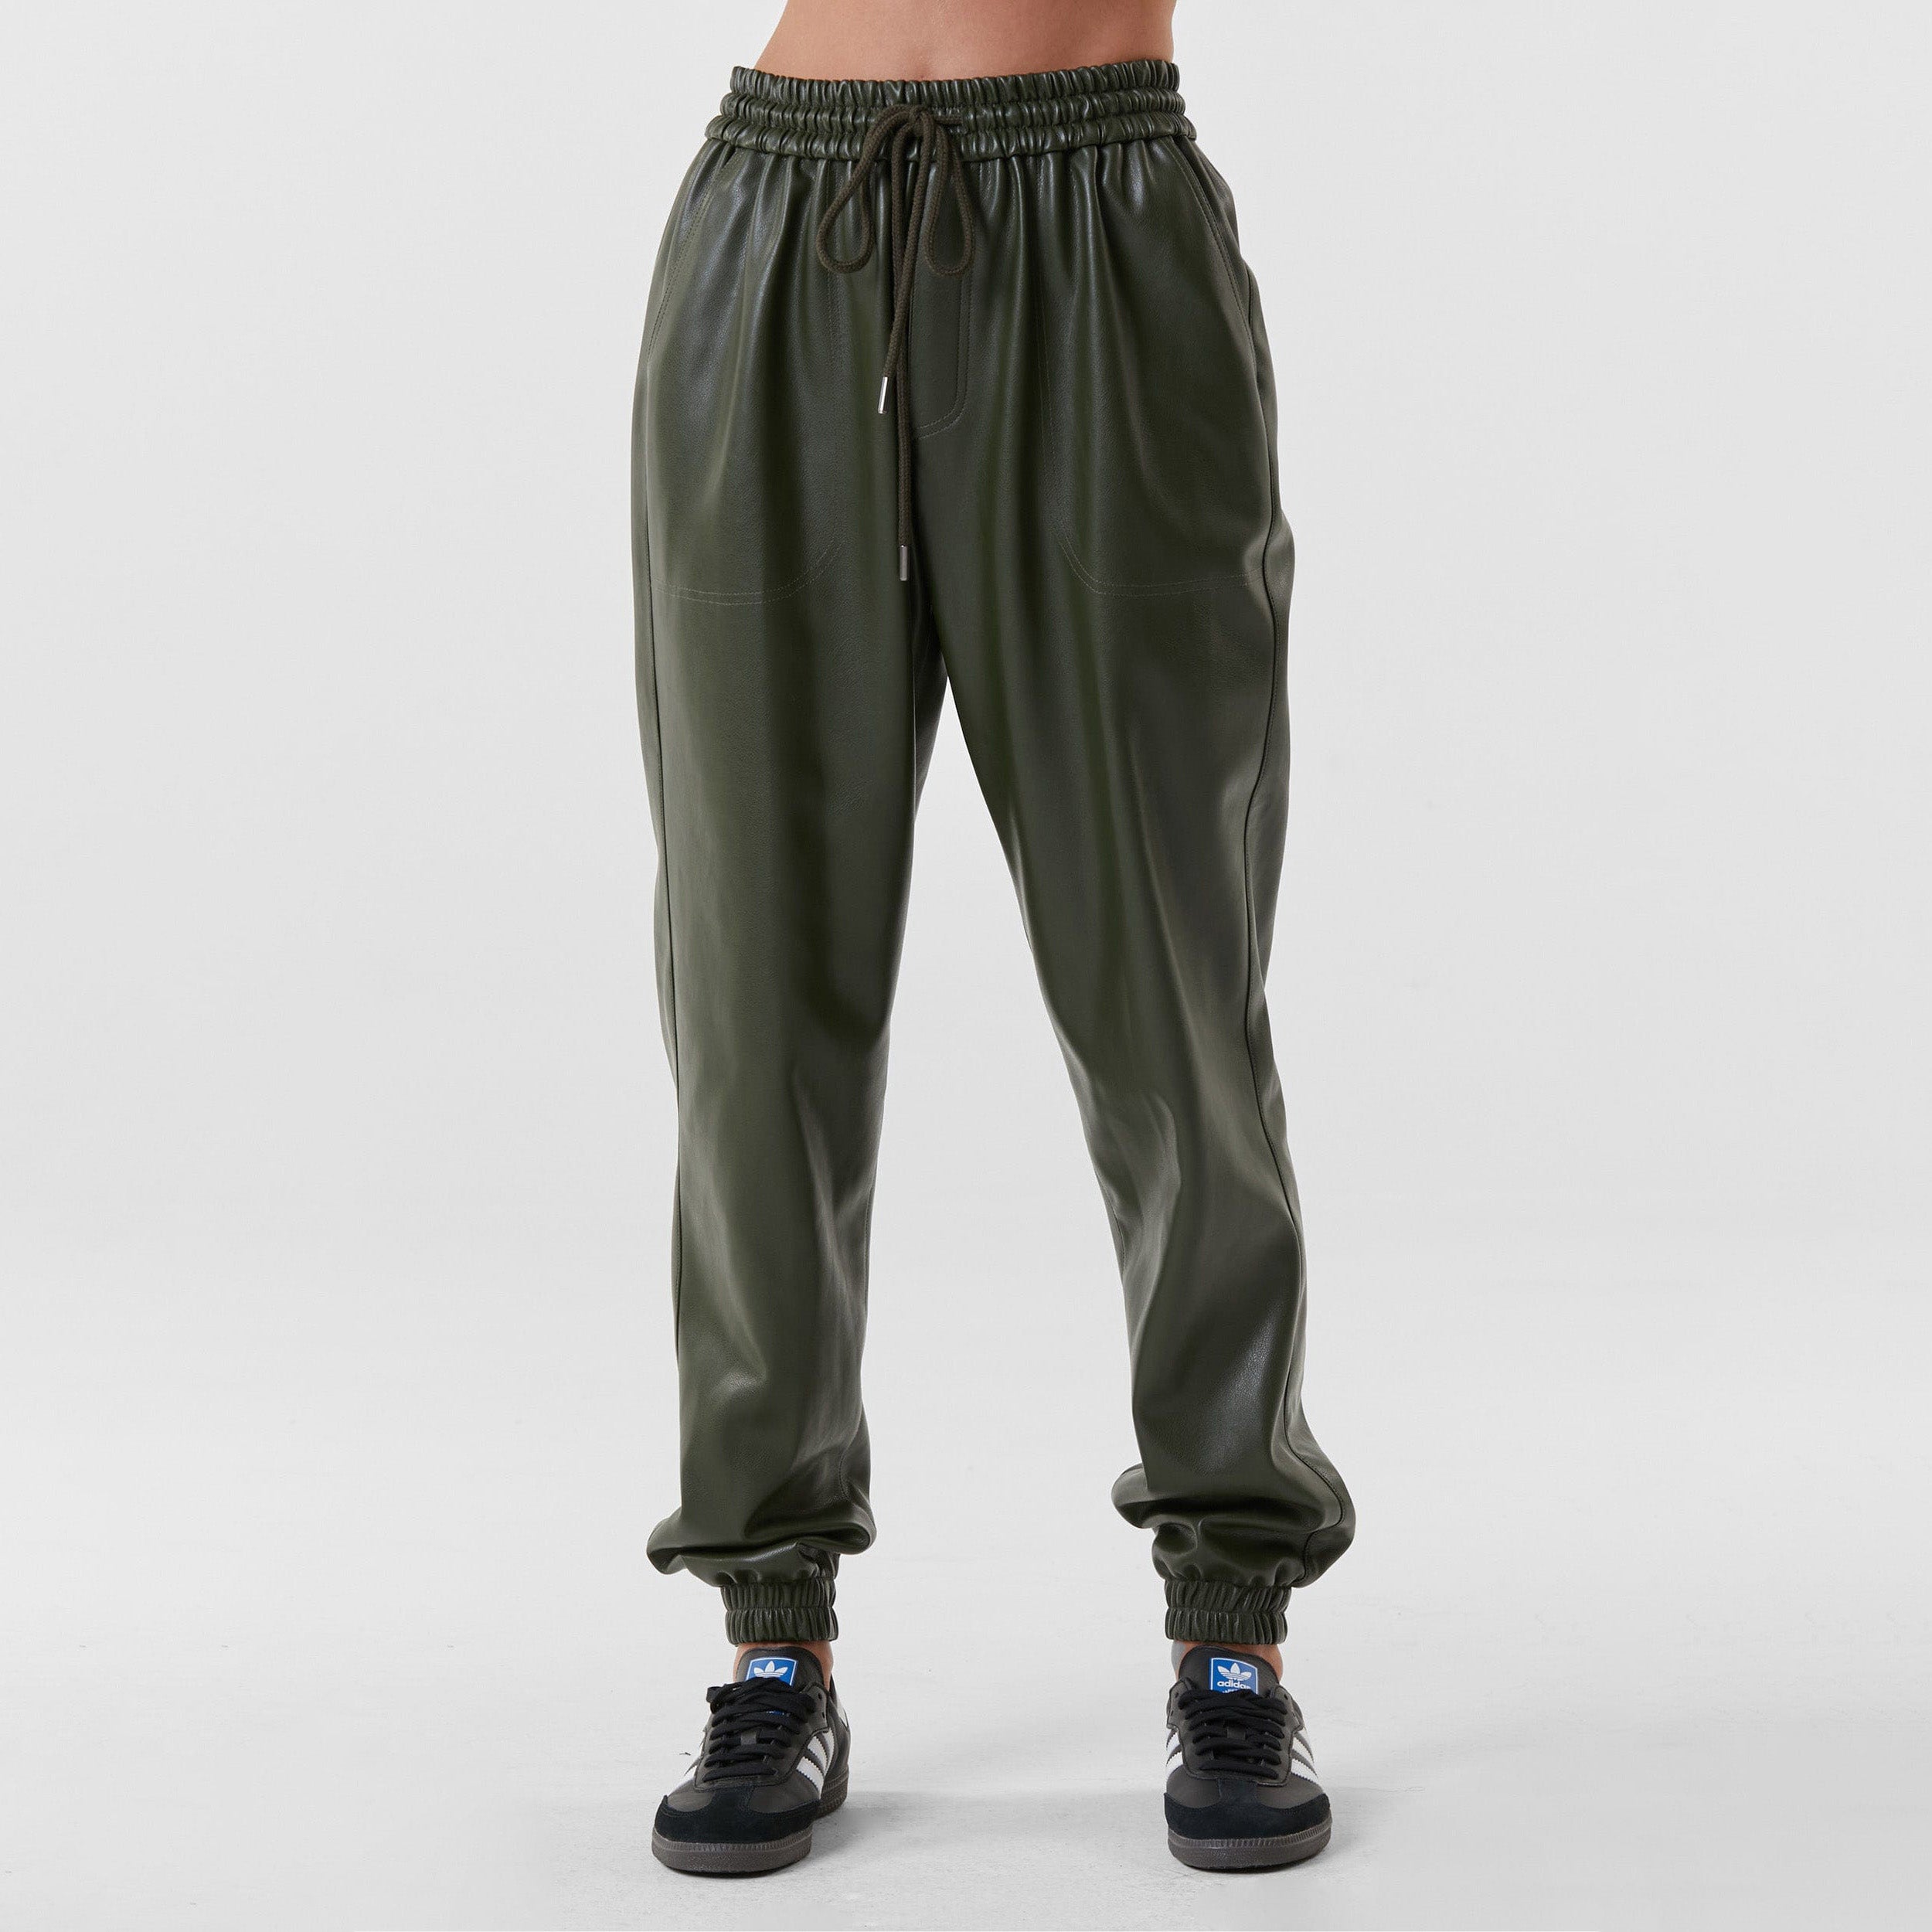 Front view of woman wearing hunter green high rise faux leather jogger with drawstring waistband and cinched ankles with suede lining.